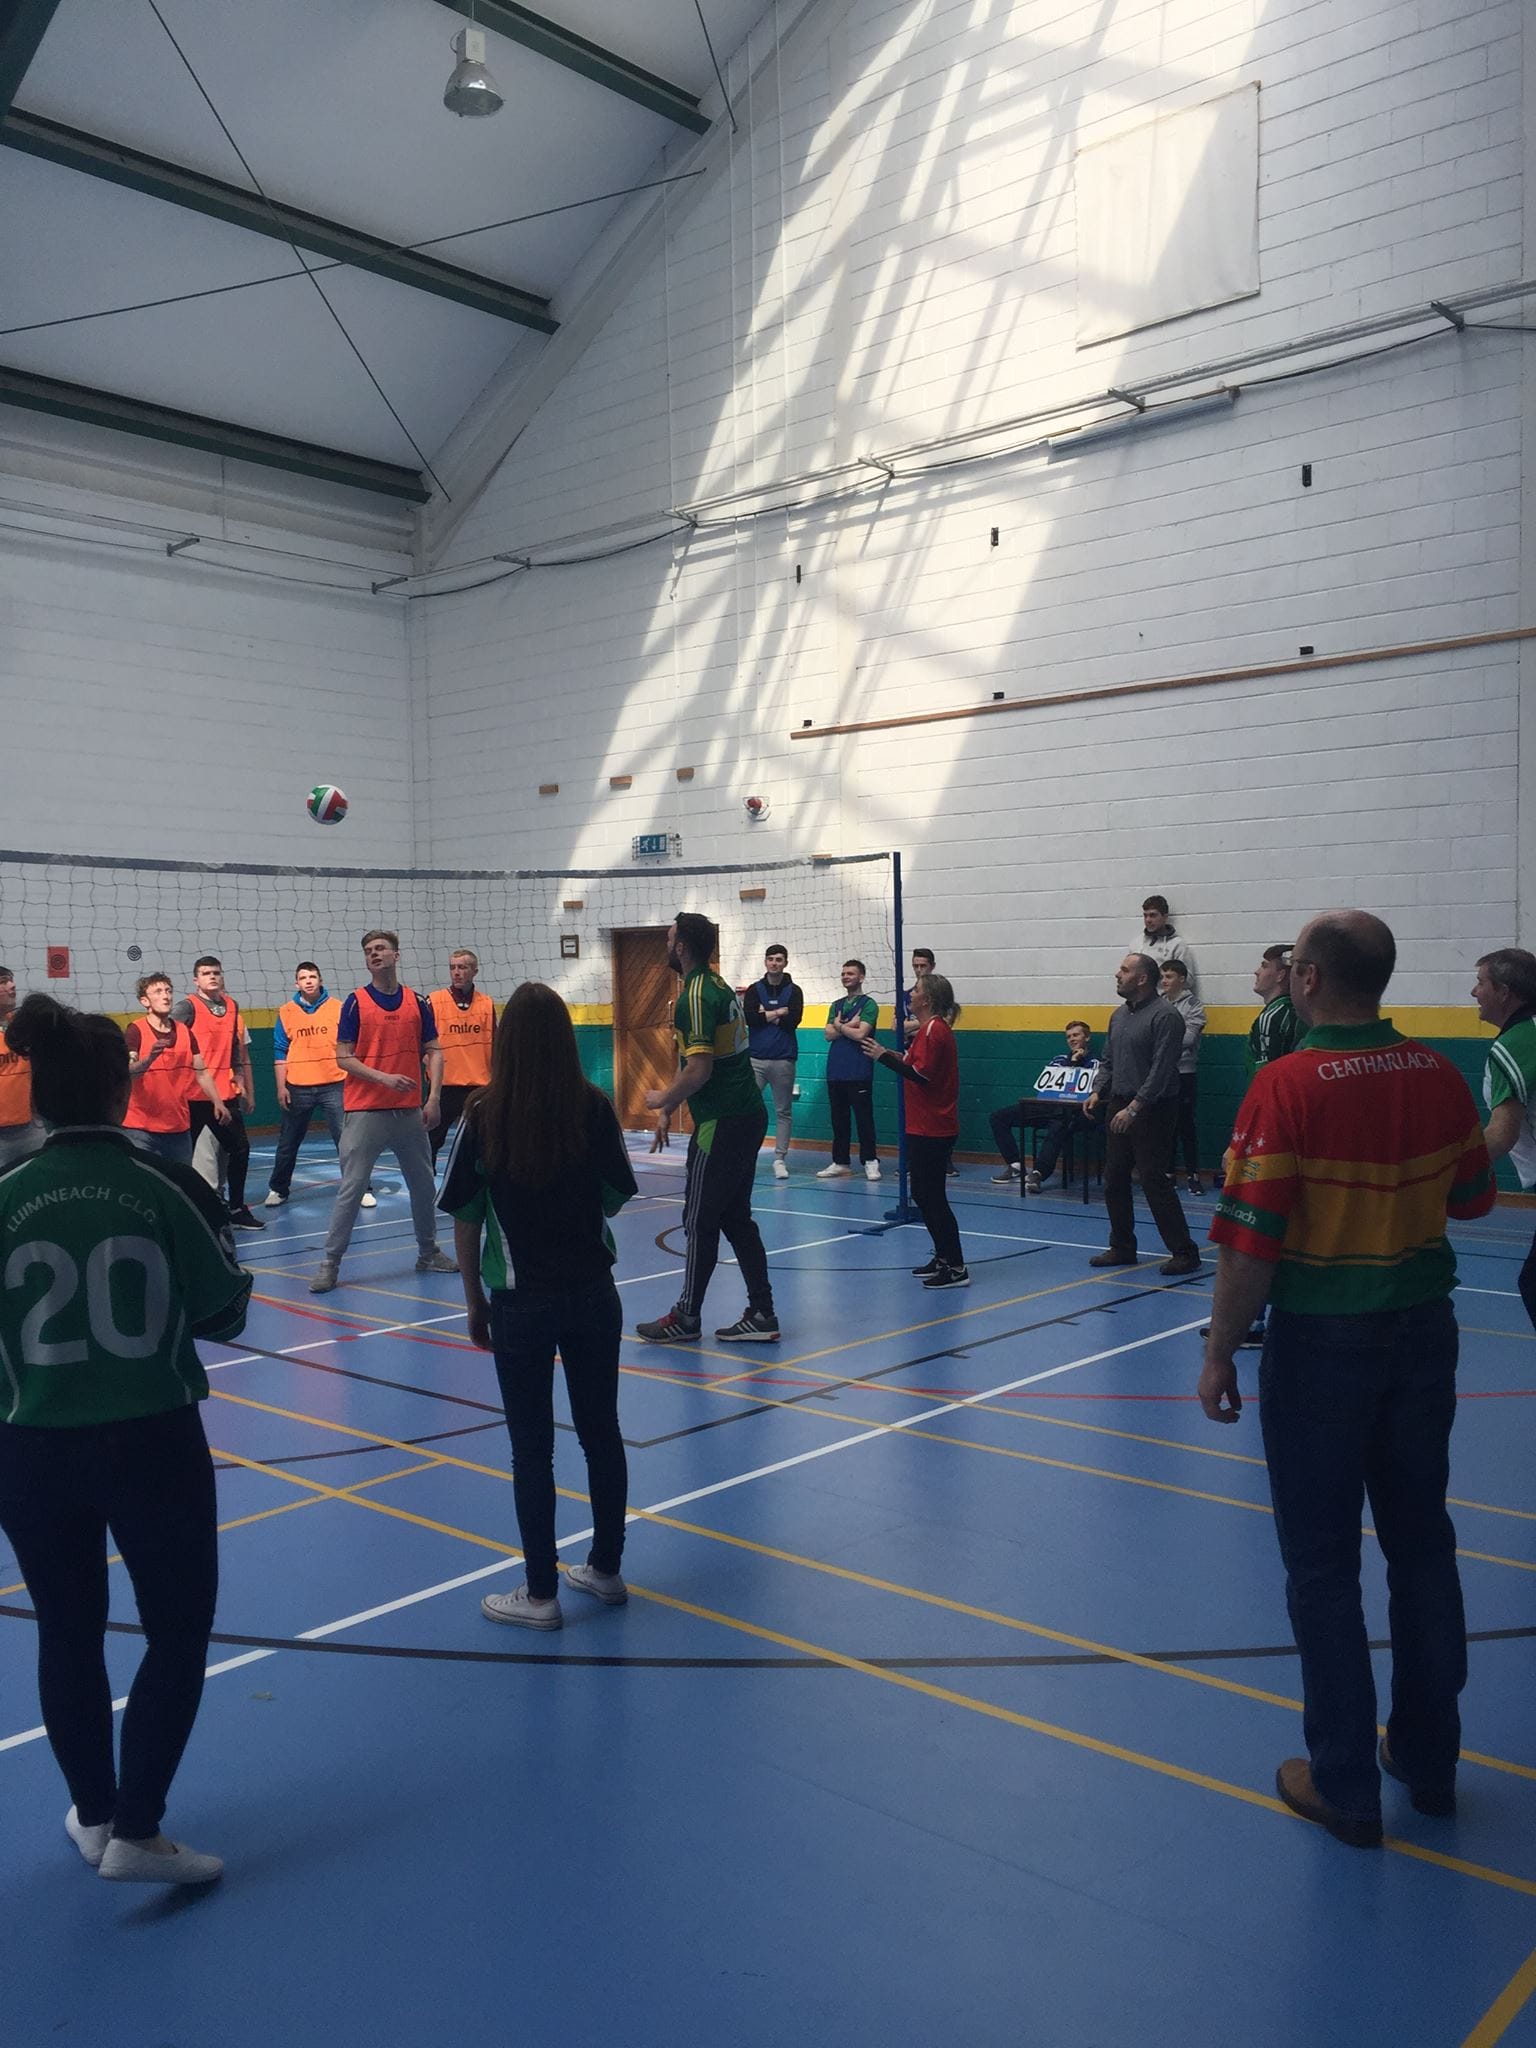 22nd April 2016: Teachers versus Students at the Desmond College Active Schools Week Volleyball Match